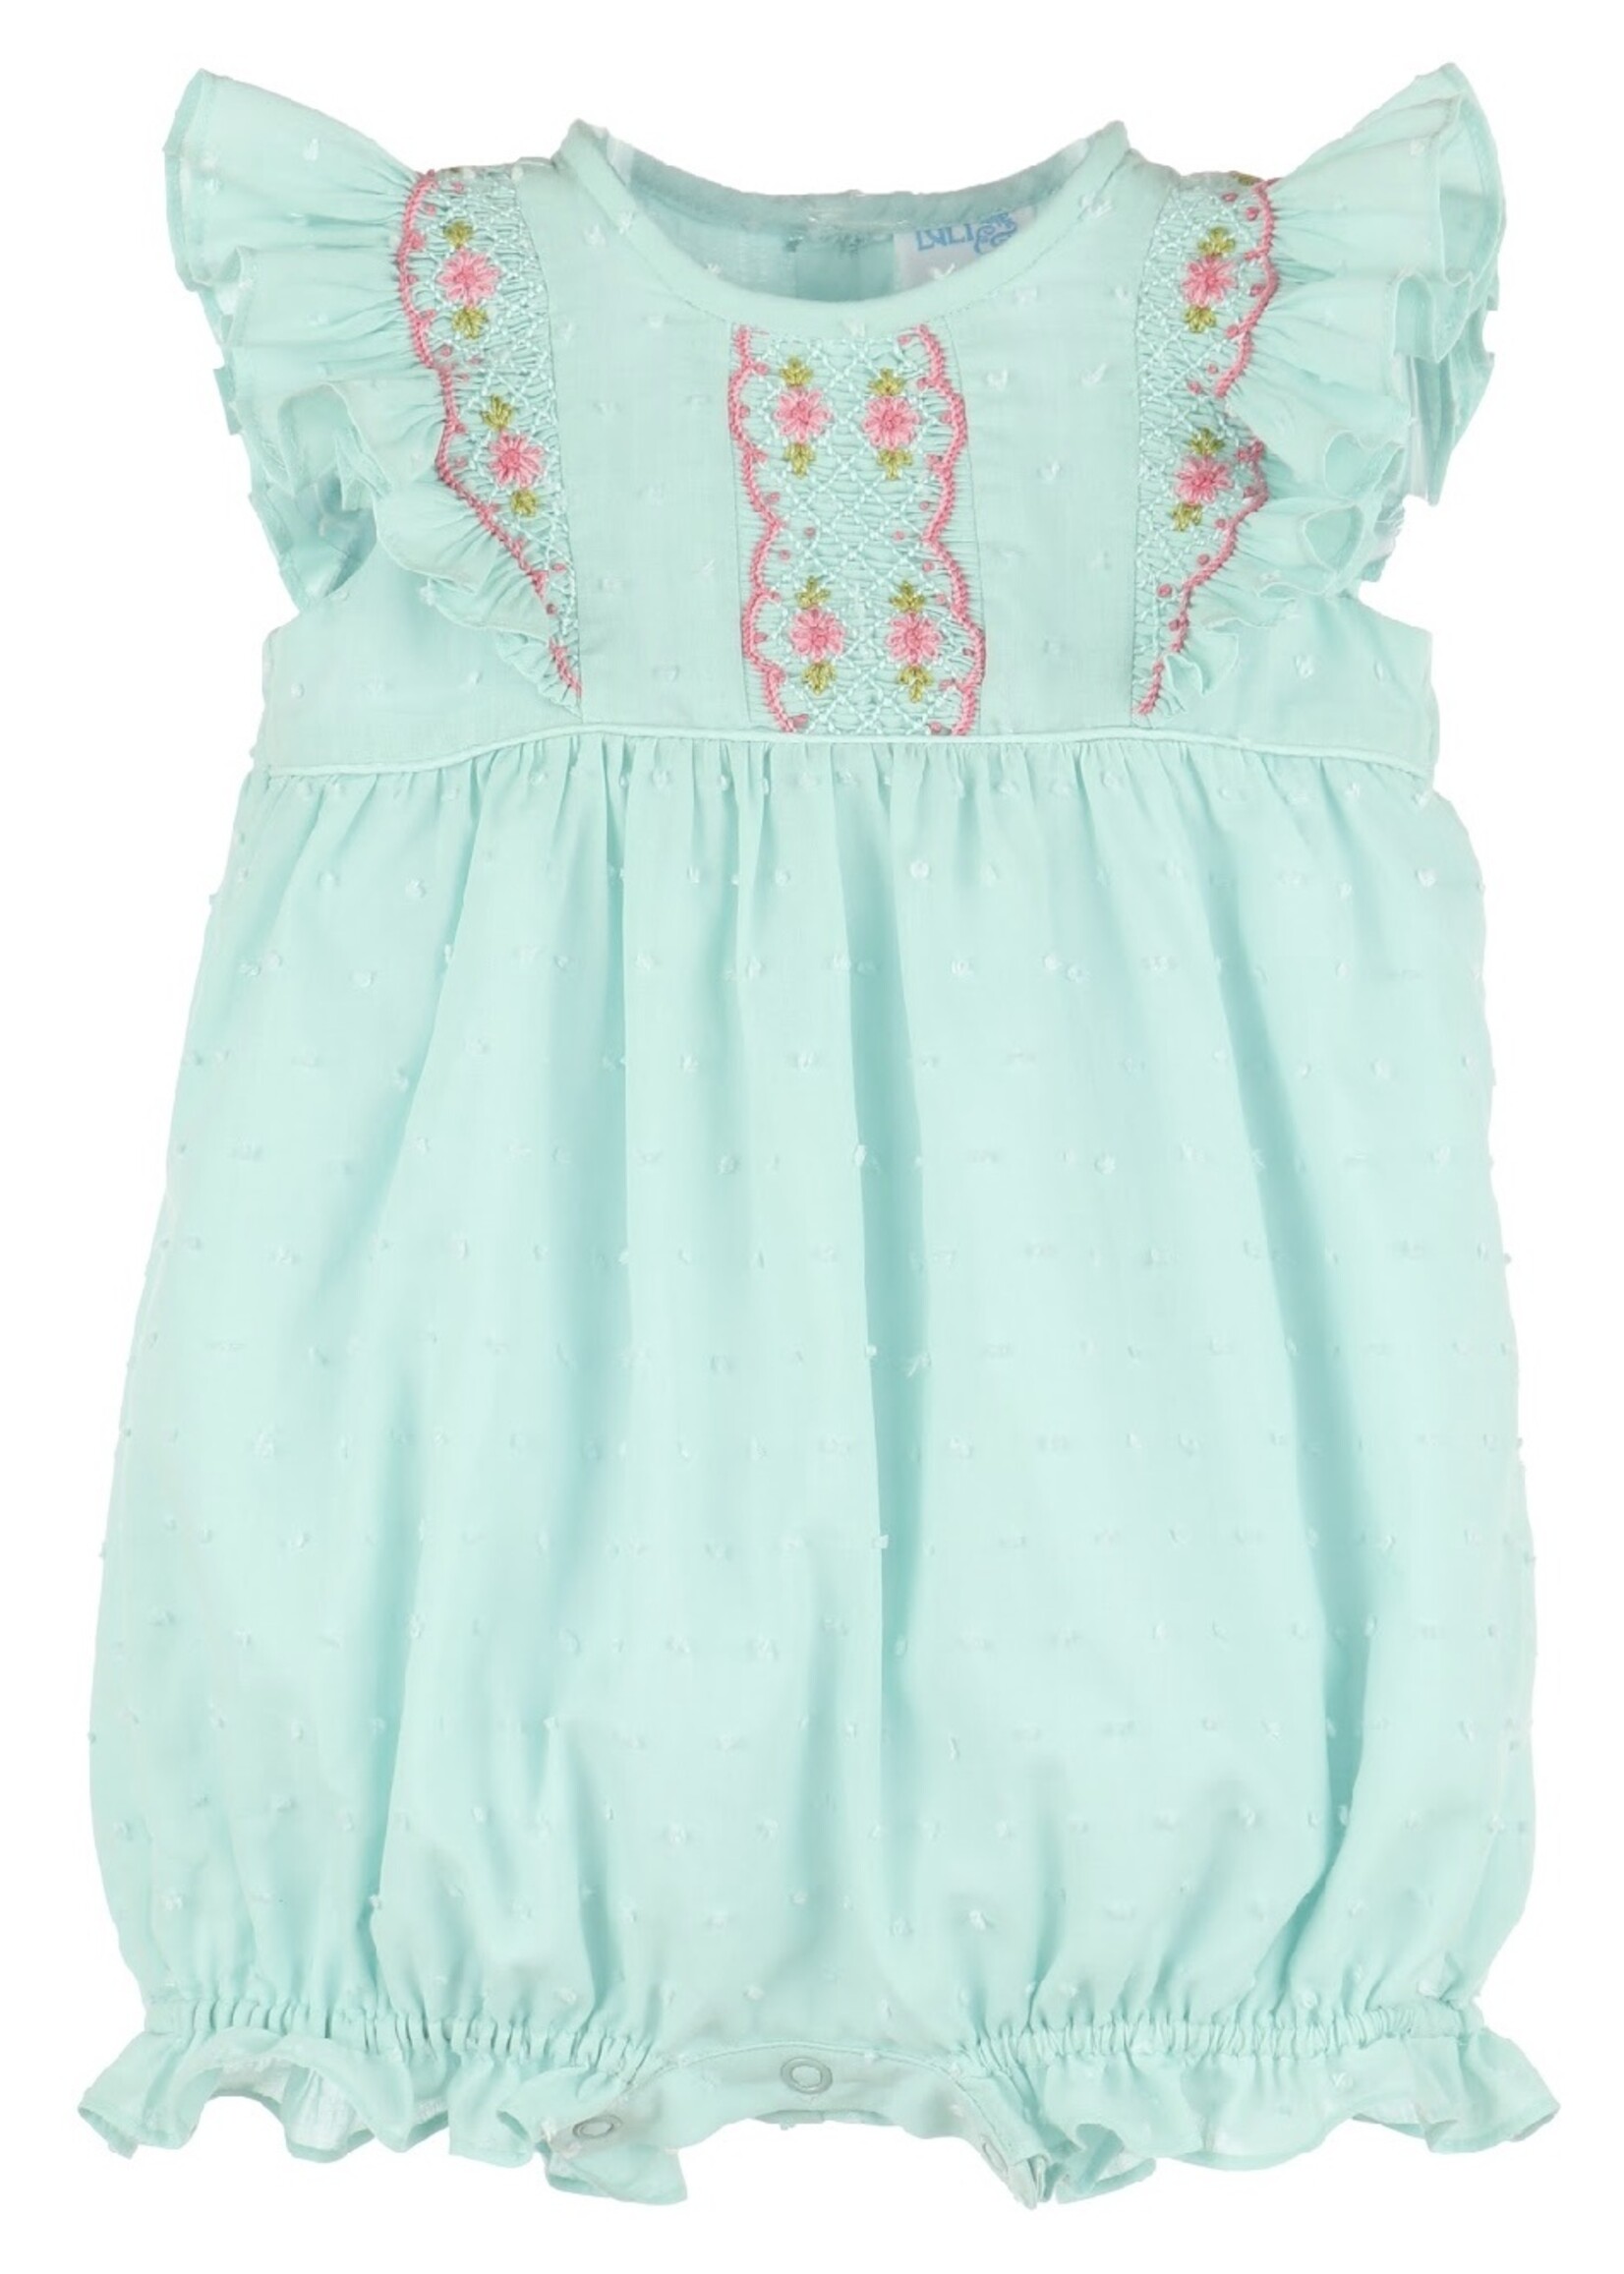 MINT SUMMER DOTTED SMOCKED BUBBLE